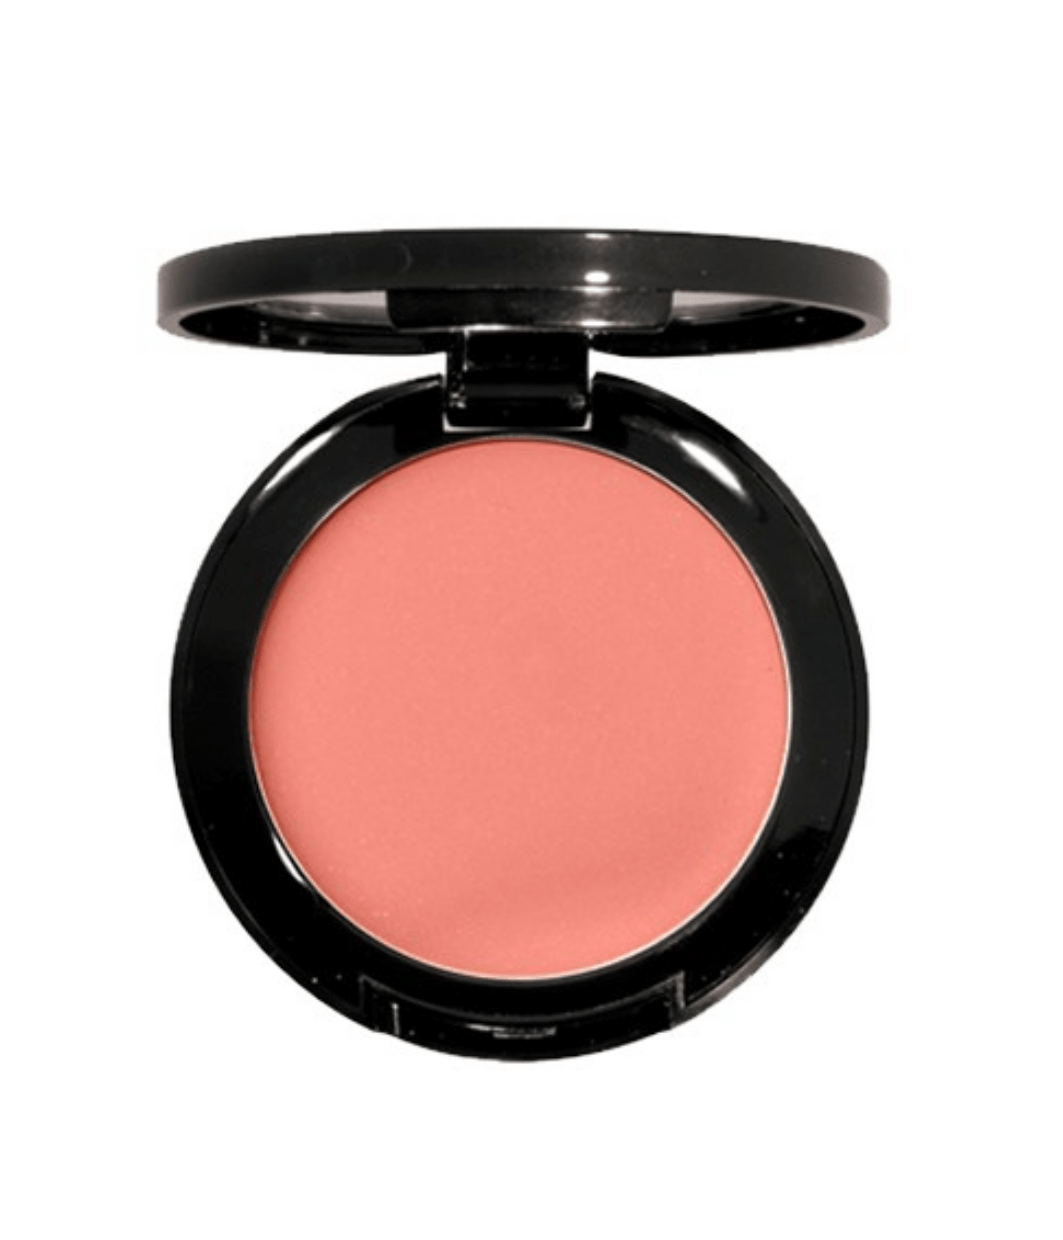 Use Blush to Make You Look Sweeter - By Hug for Trends